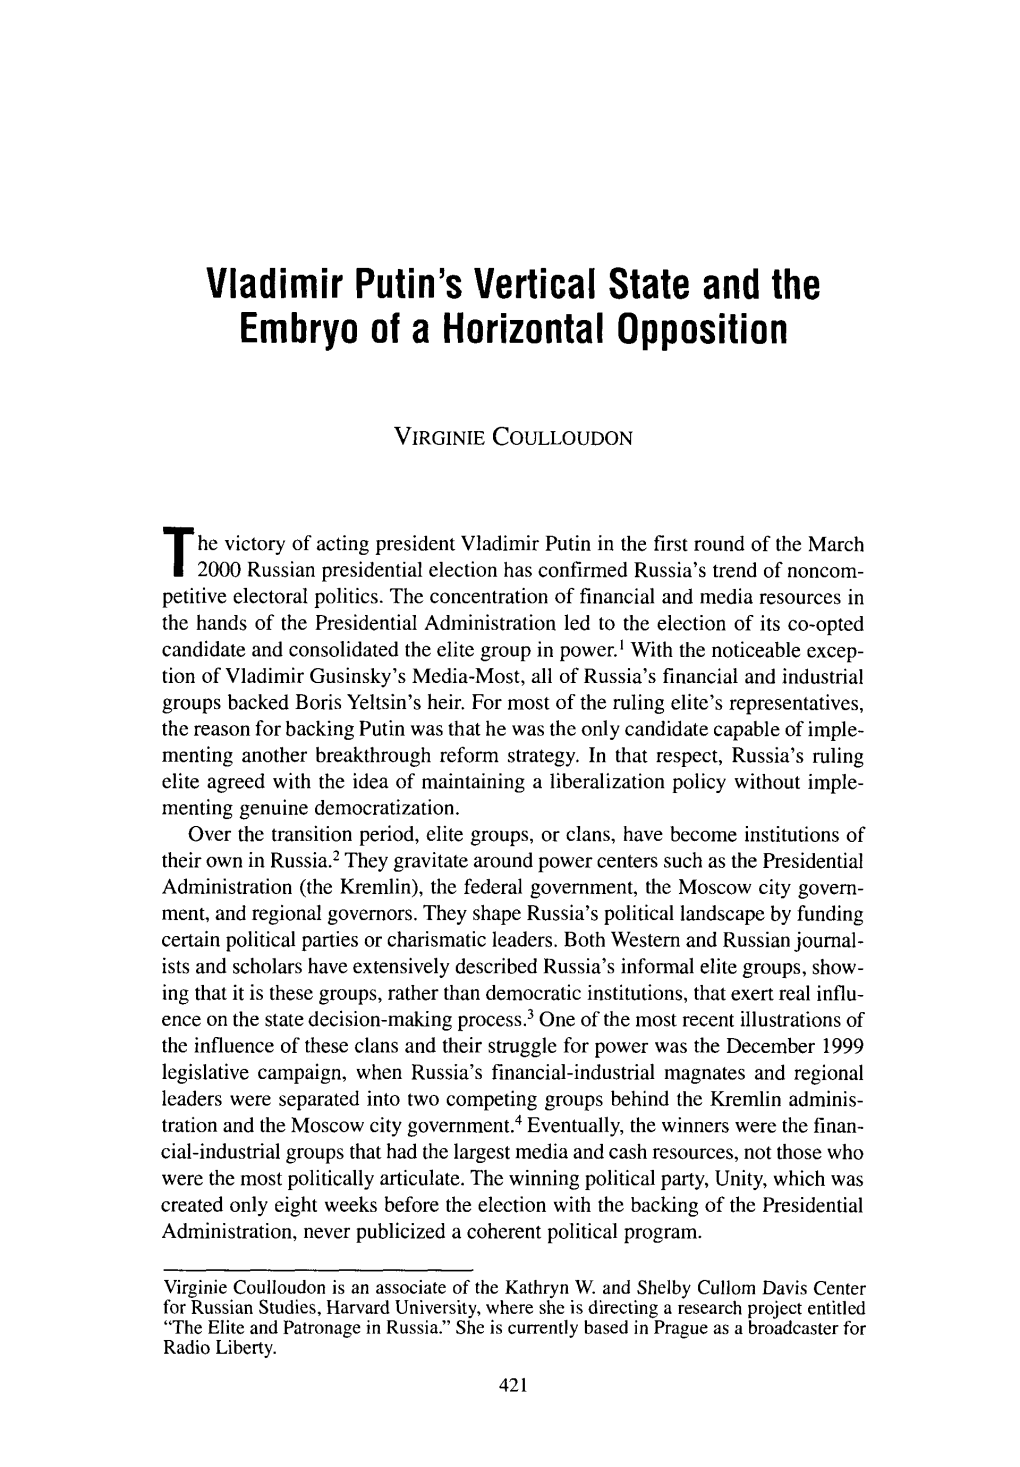 Vladimir Putin's Vertical State and the Embryo of a Horizontal Opposition